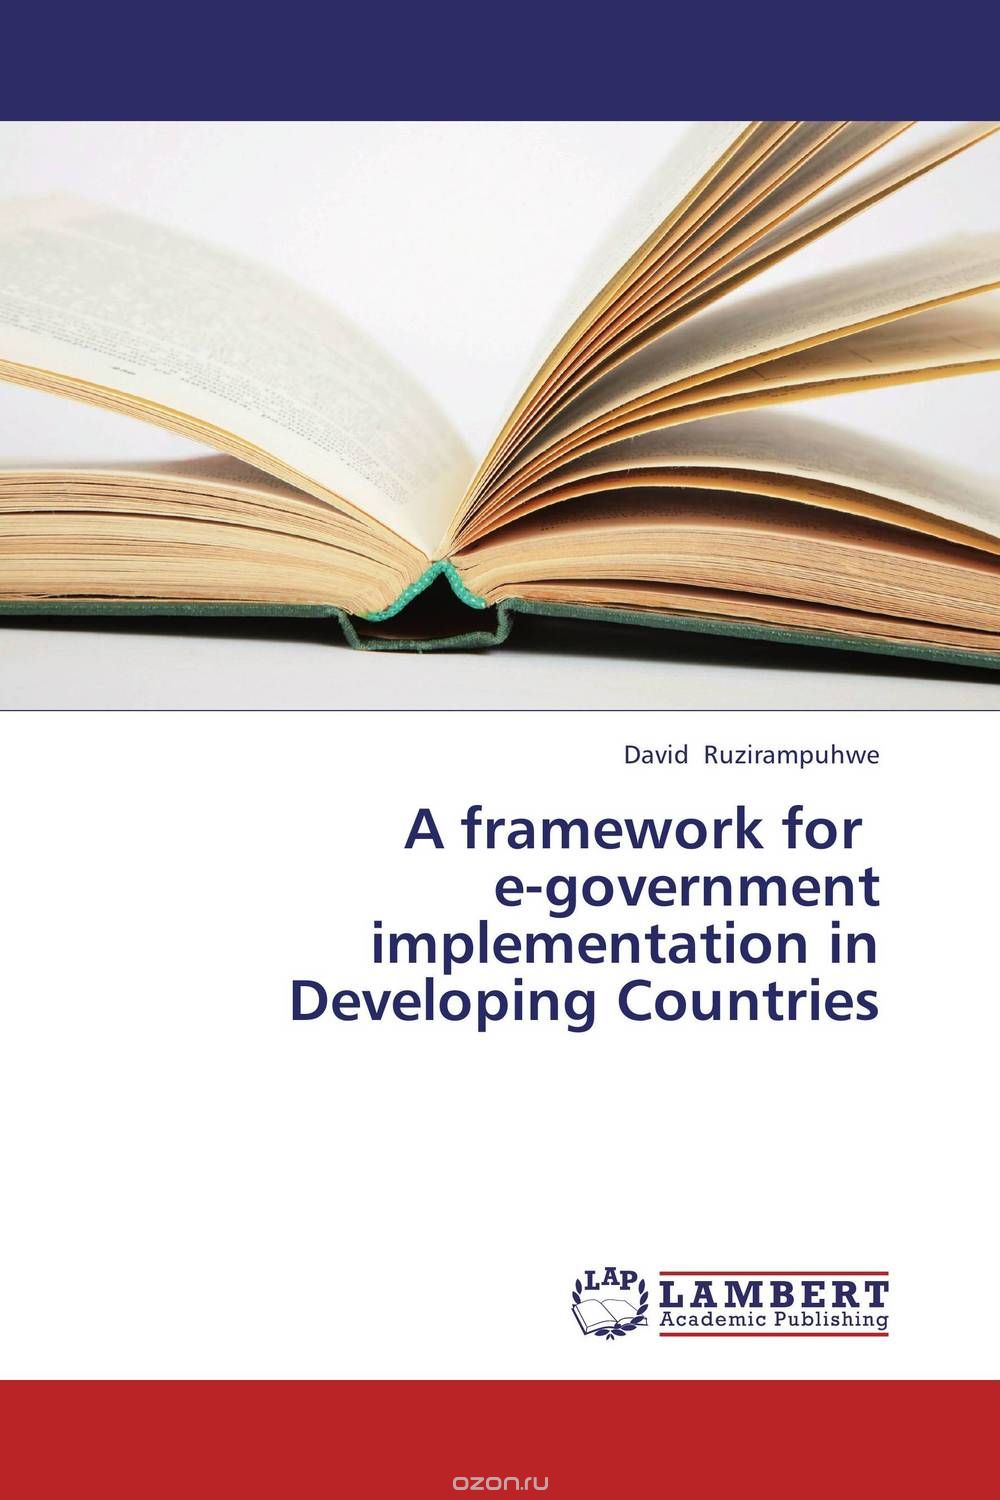 Скачать книгу "A framework for   e-government implementation in Developing Countries"